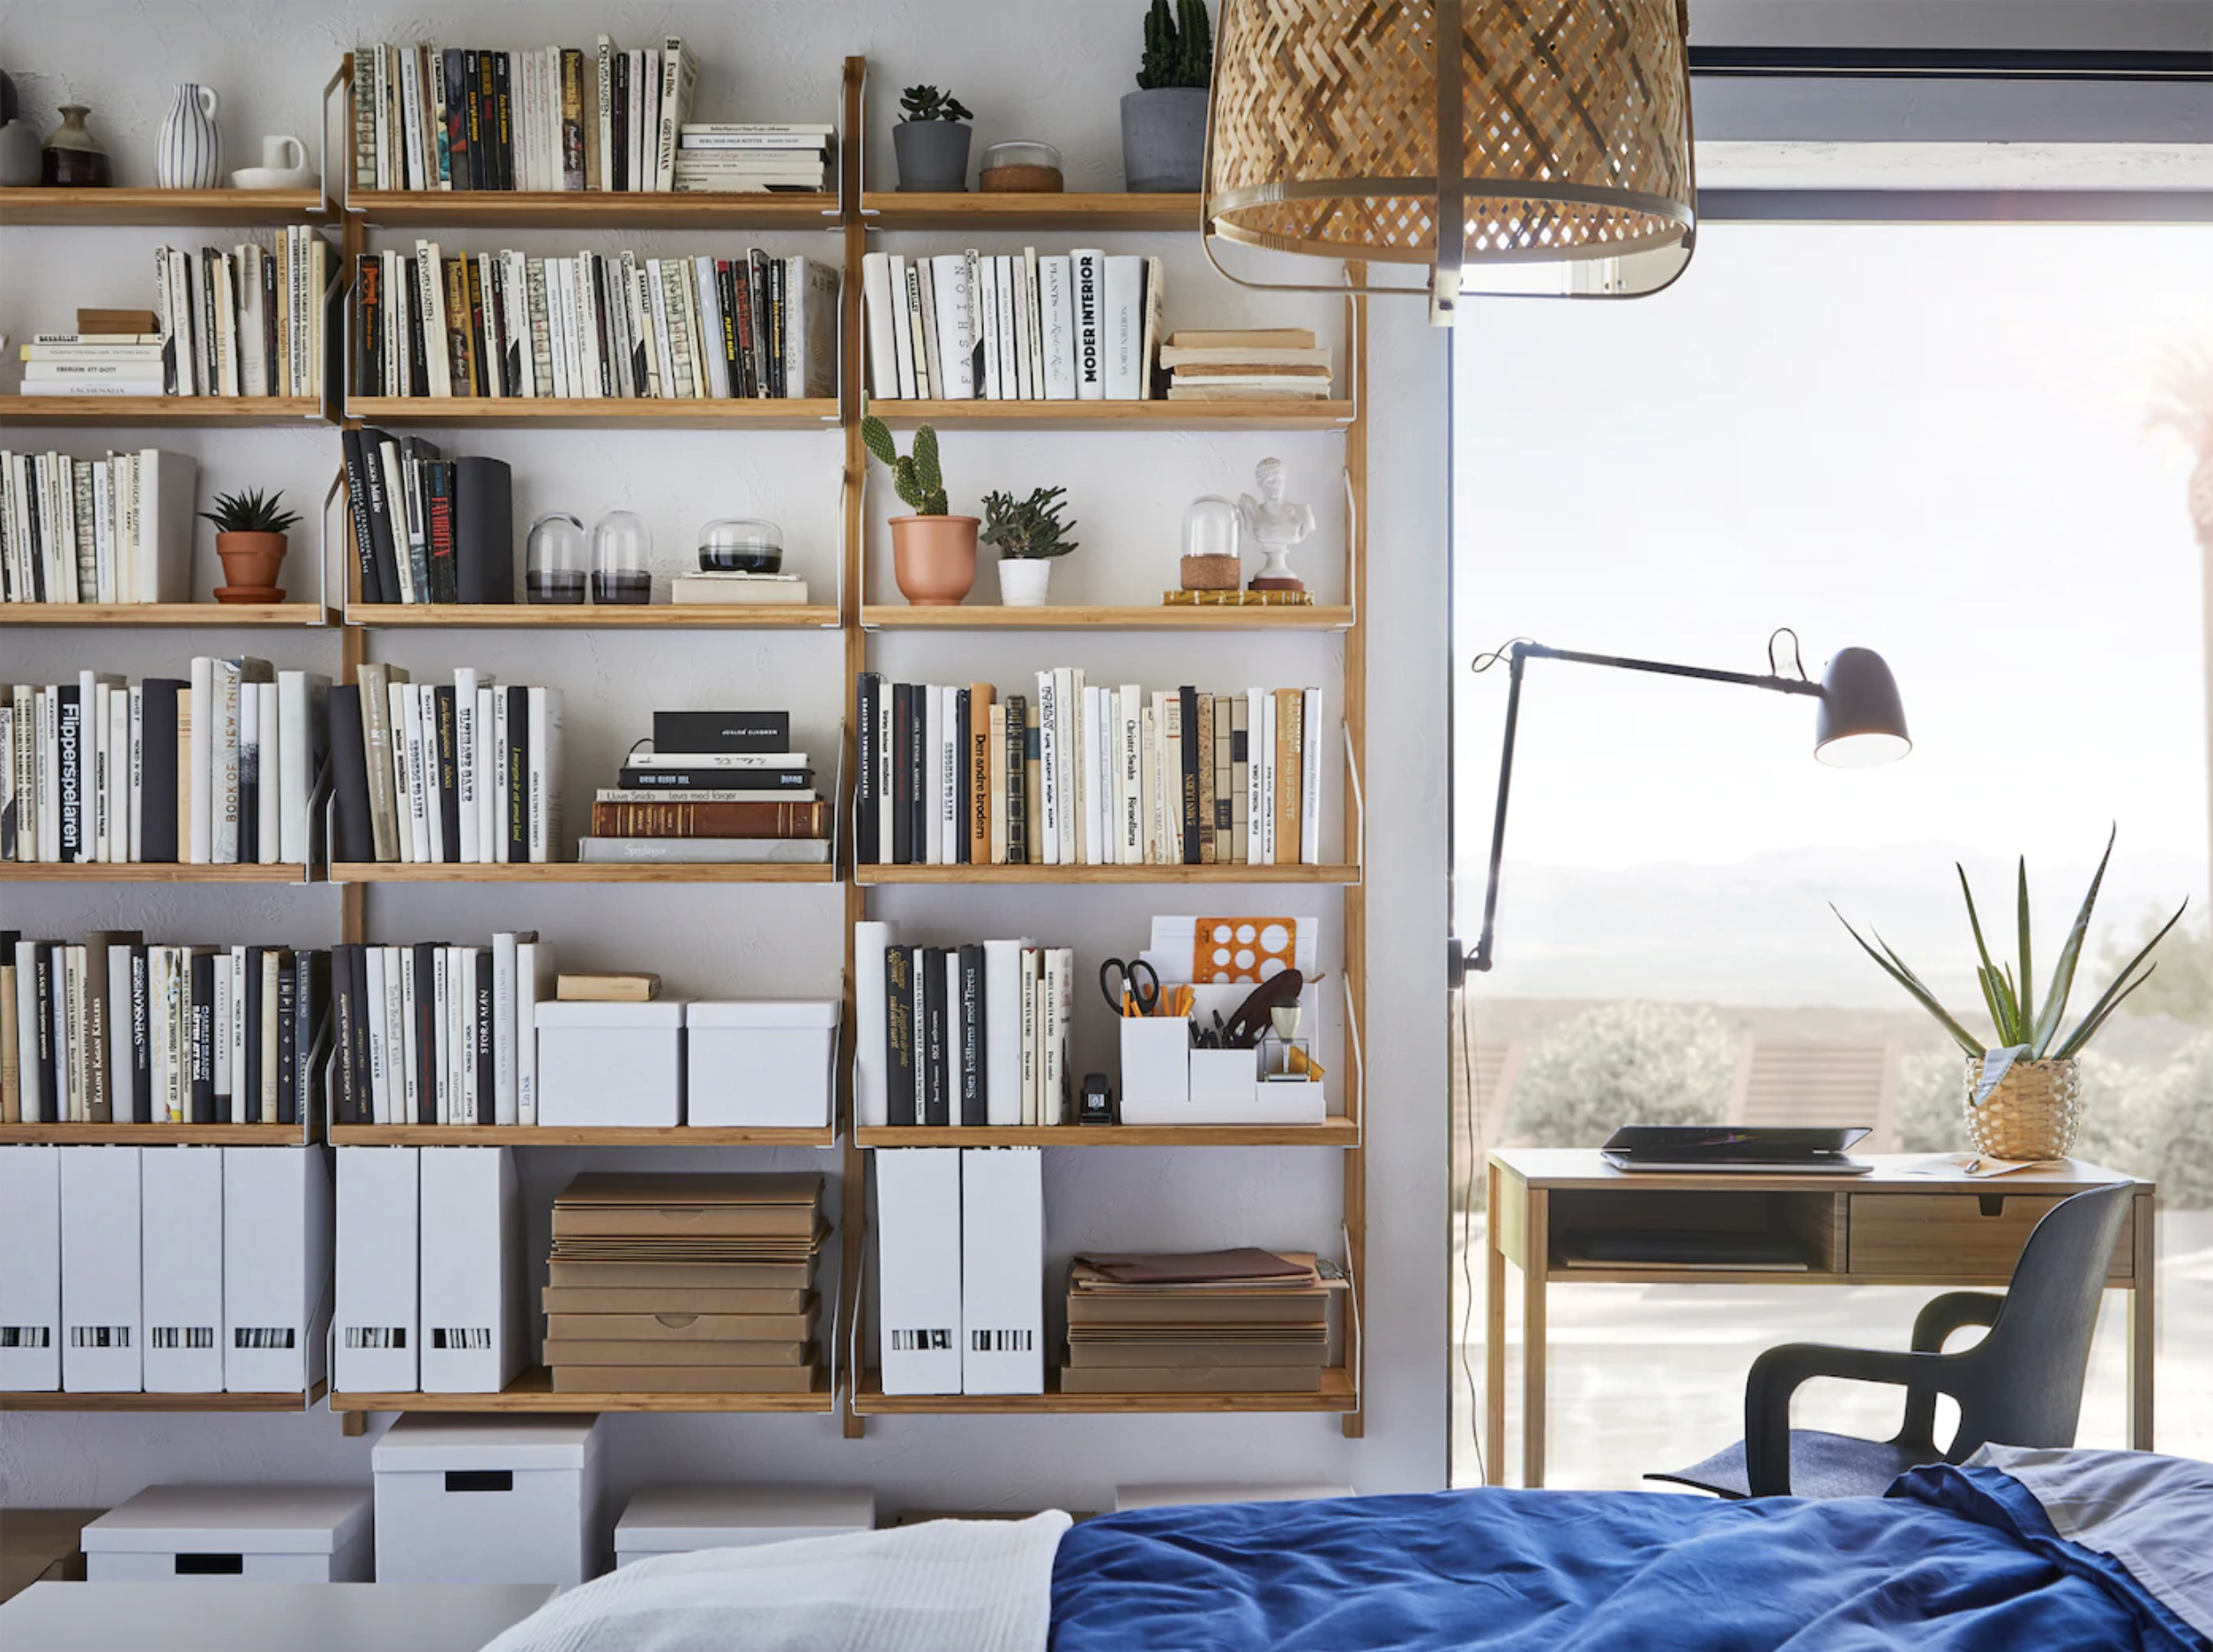 You are currently viewing 7 Inspiring And Cool Display Shelf Ideas To Spruce Up The Walls